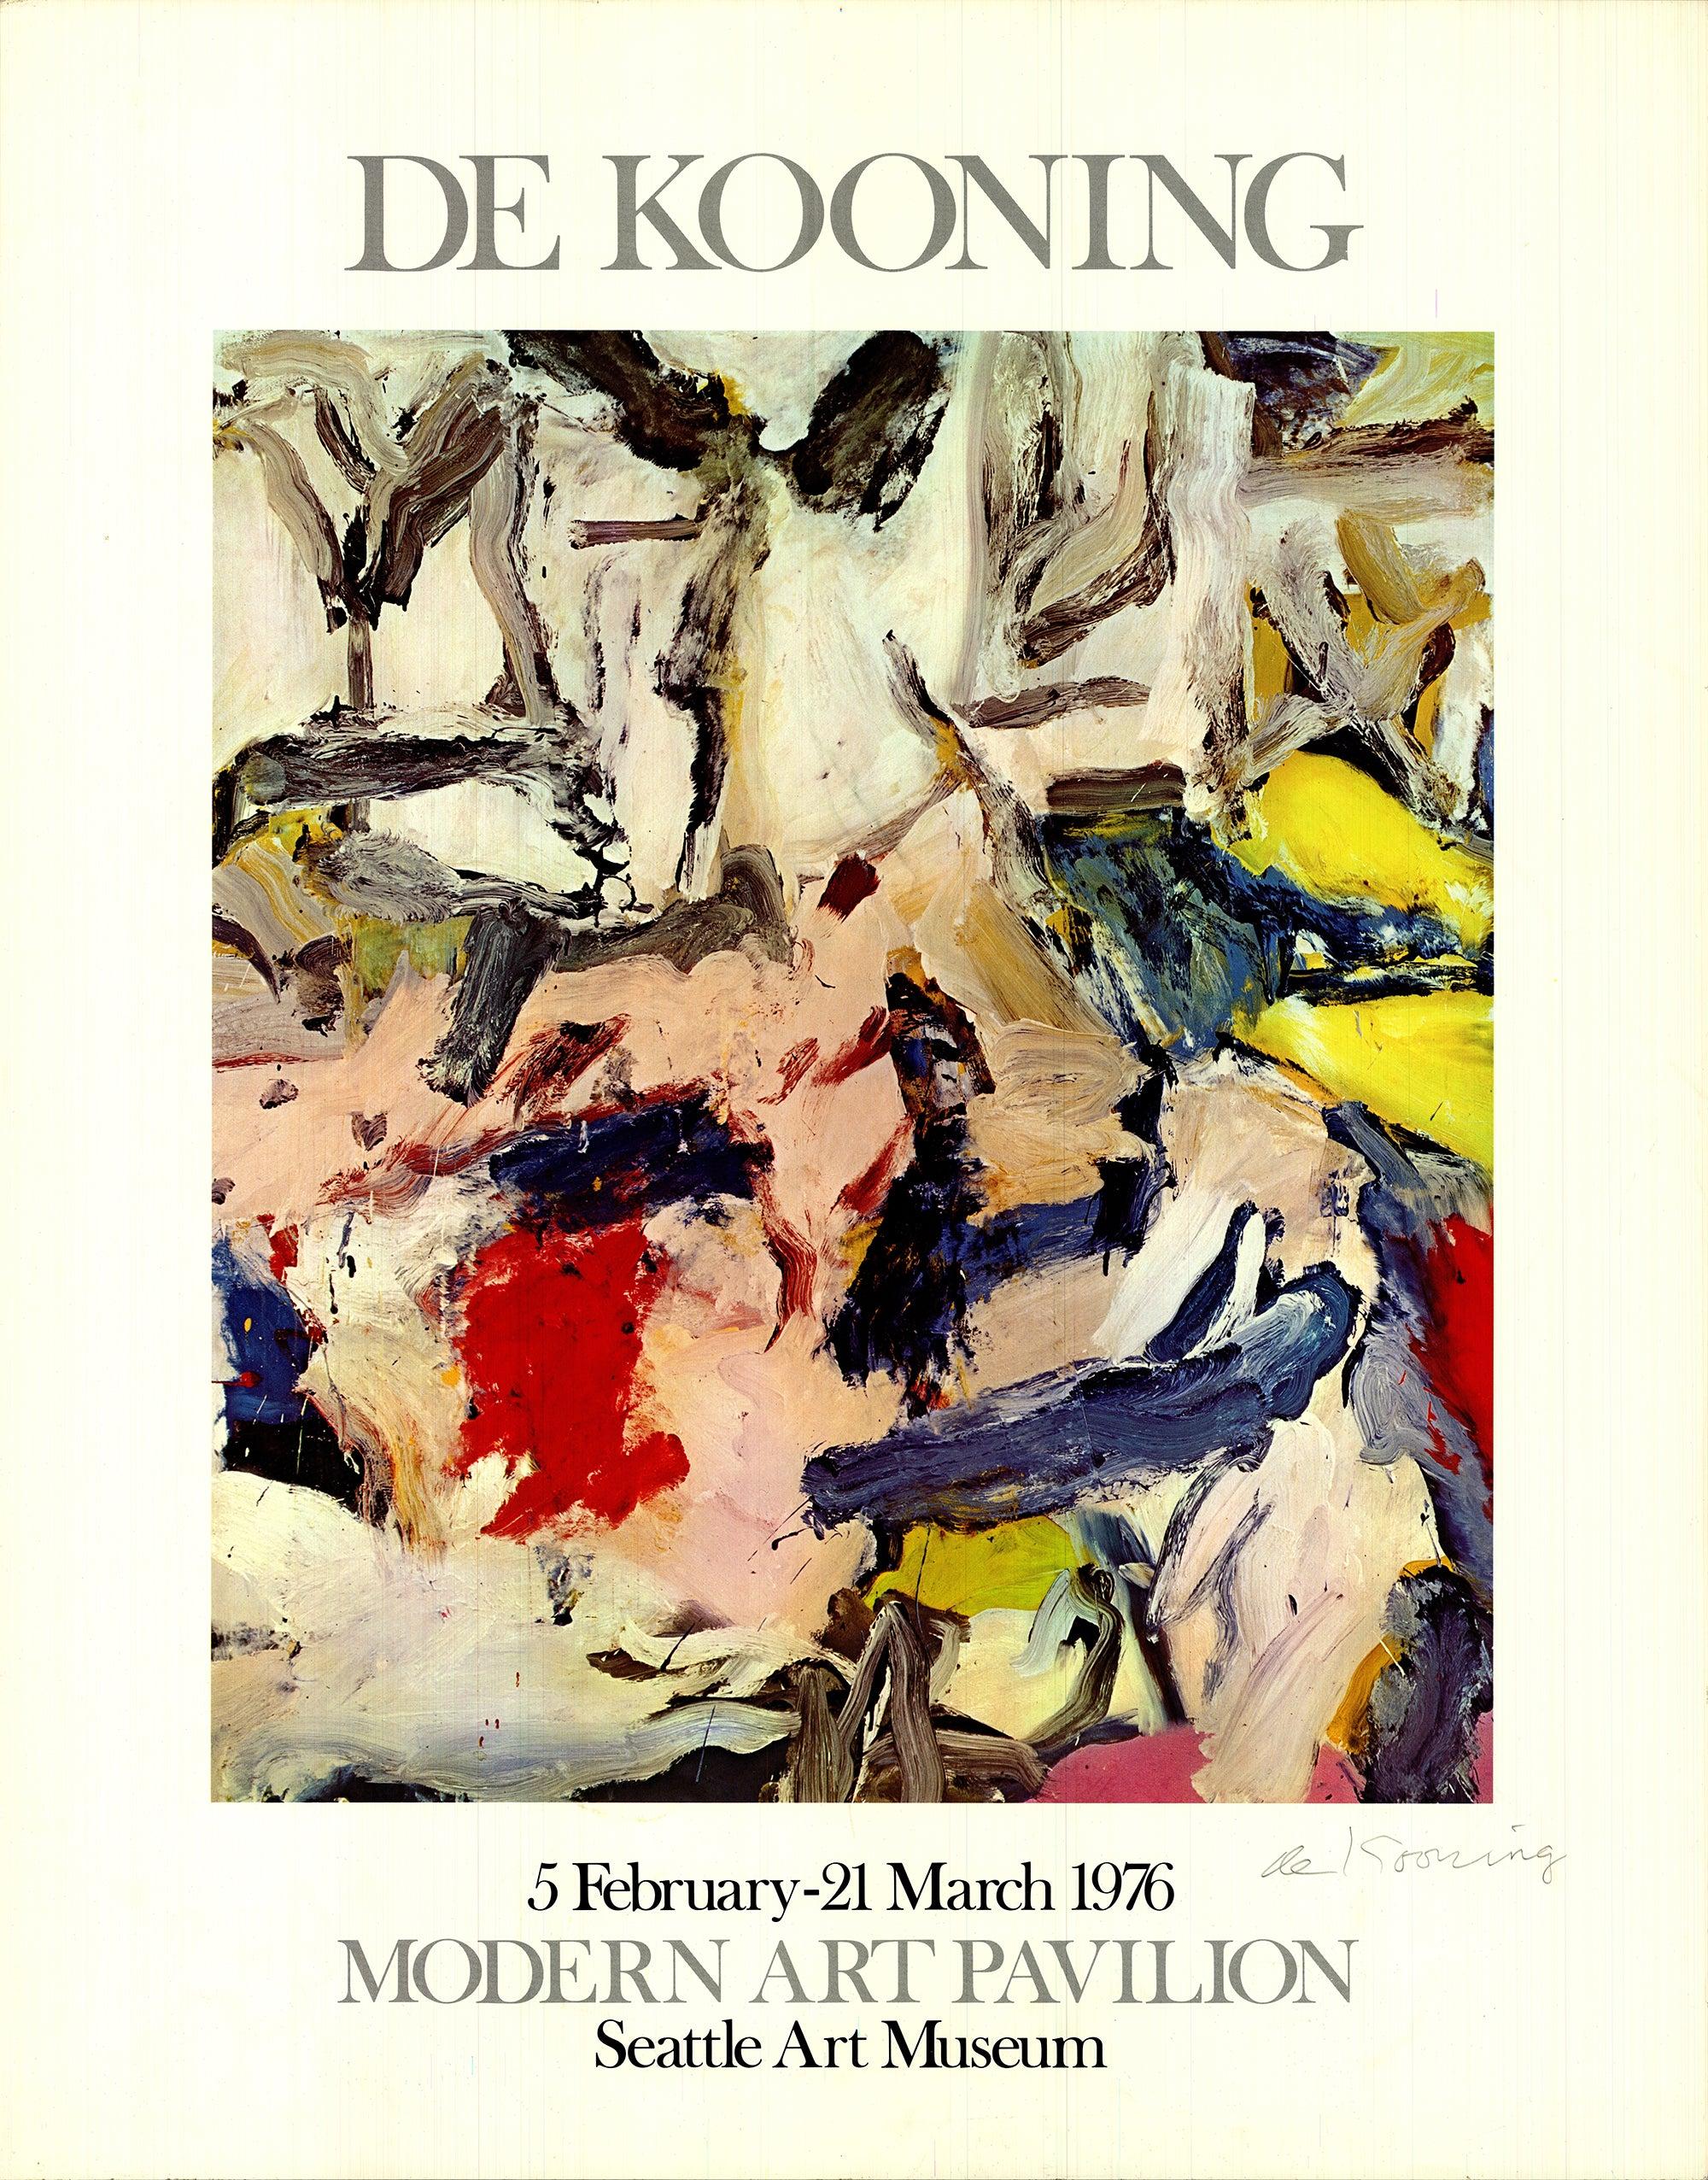 the title of willem de kooning's north atlantic light refers to